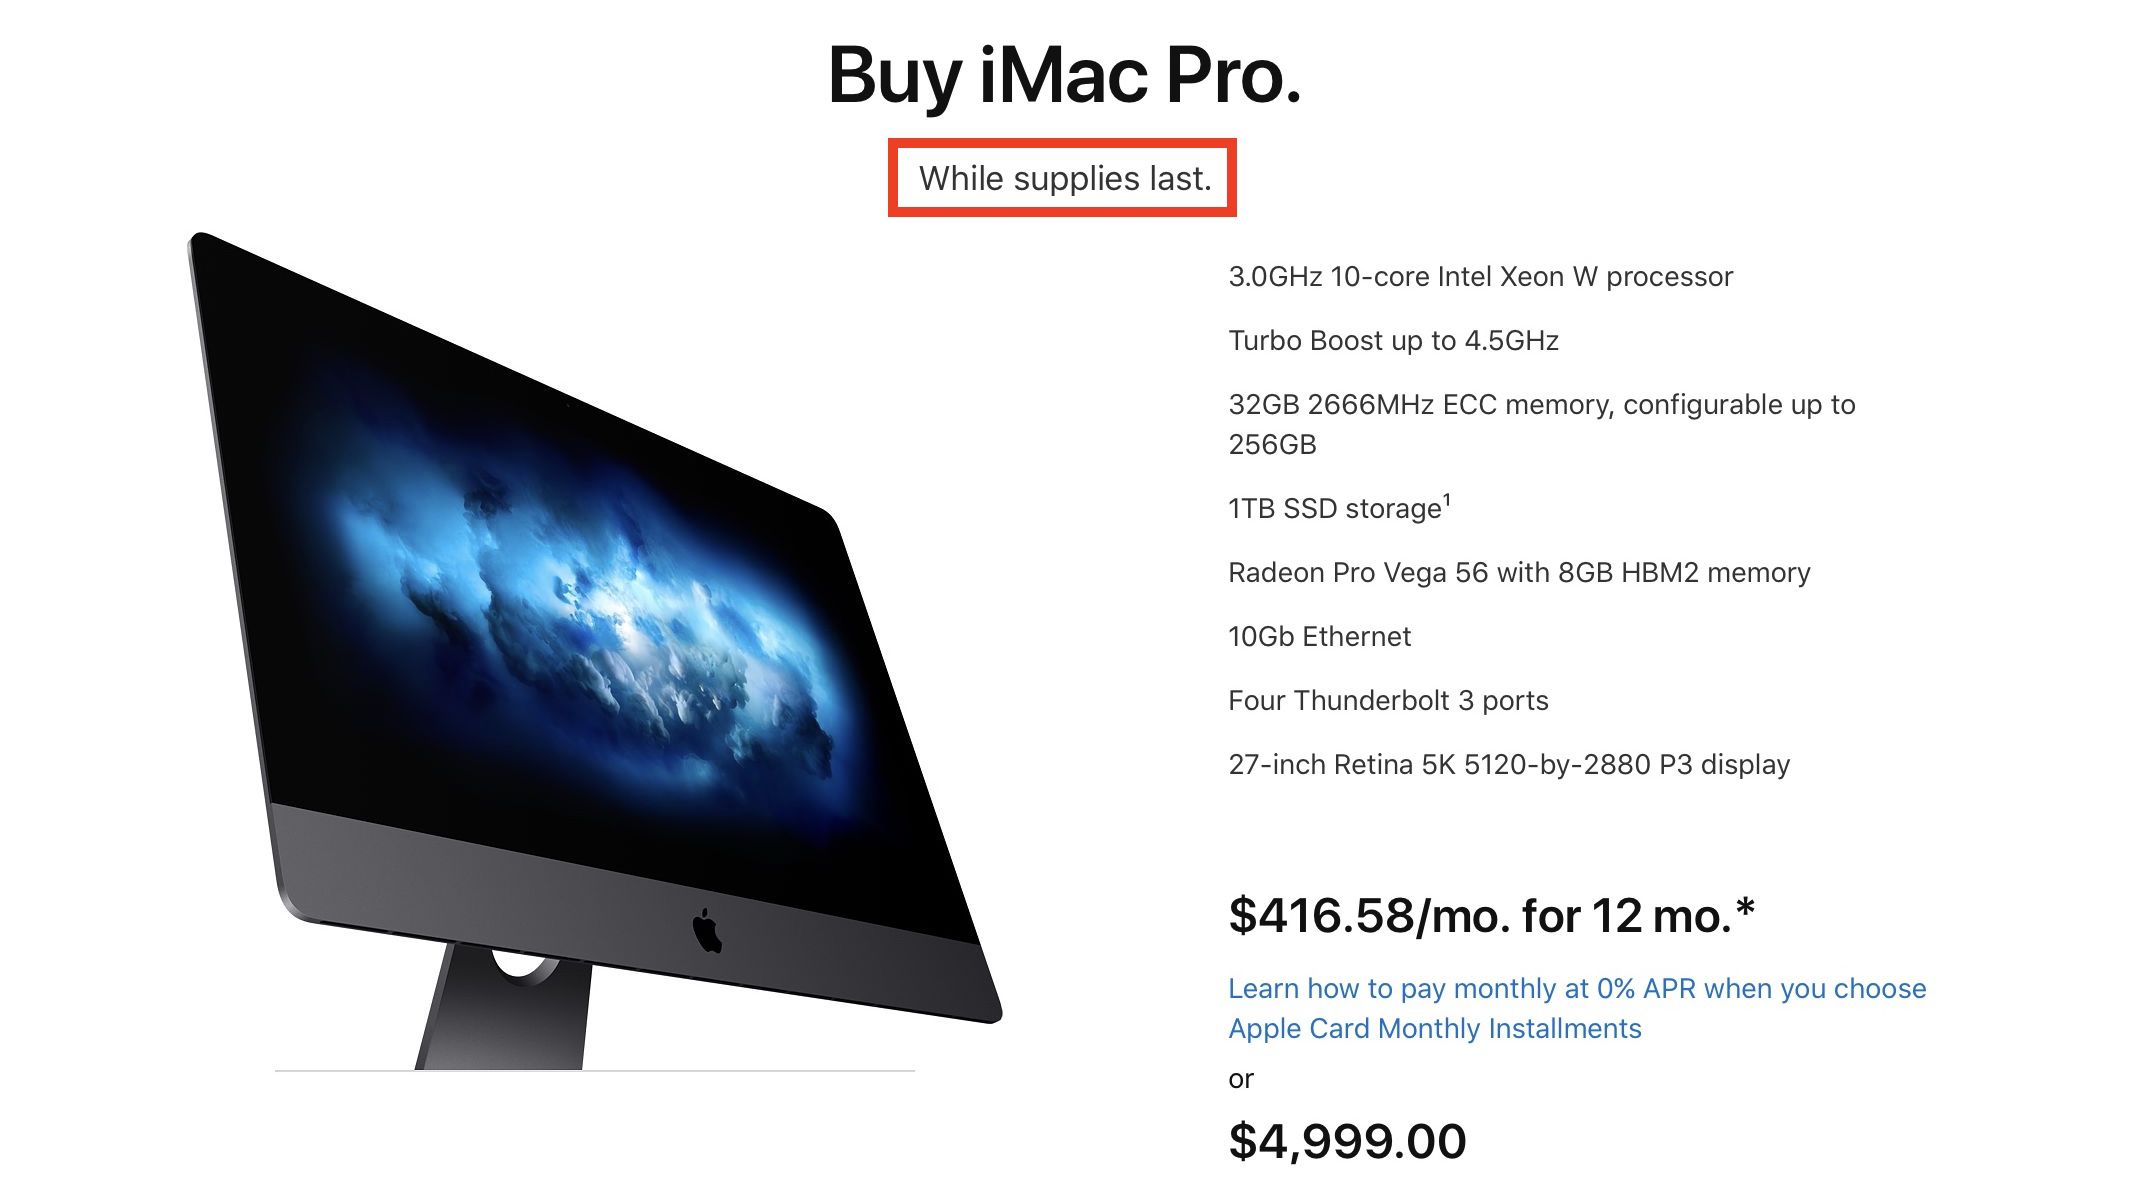 IMac Pro is no longer individually configurable, available ‘While supplies last’